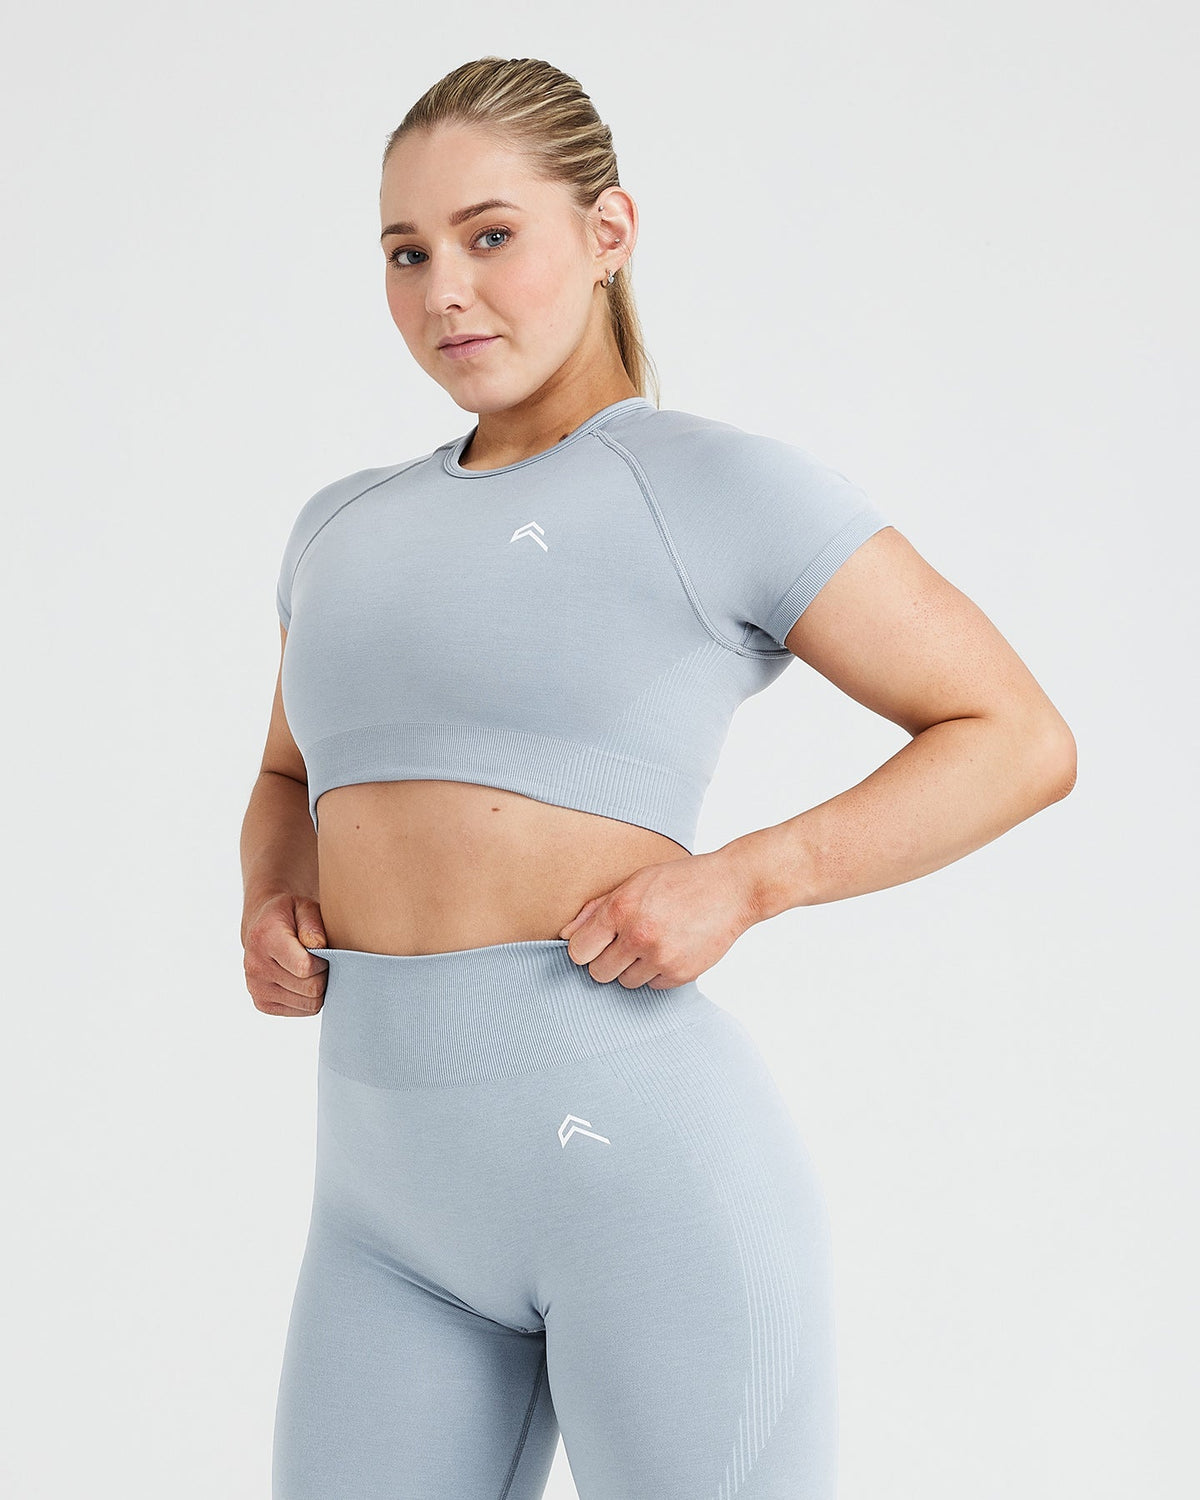 Seamless Ribbed Crop Top and Leggings Sets TW2116 - twinall